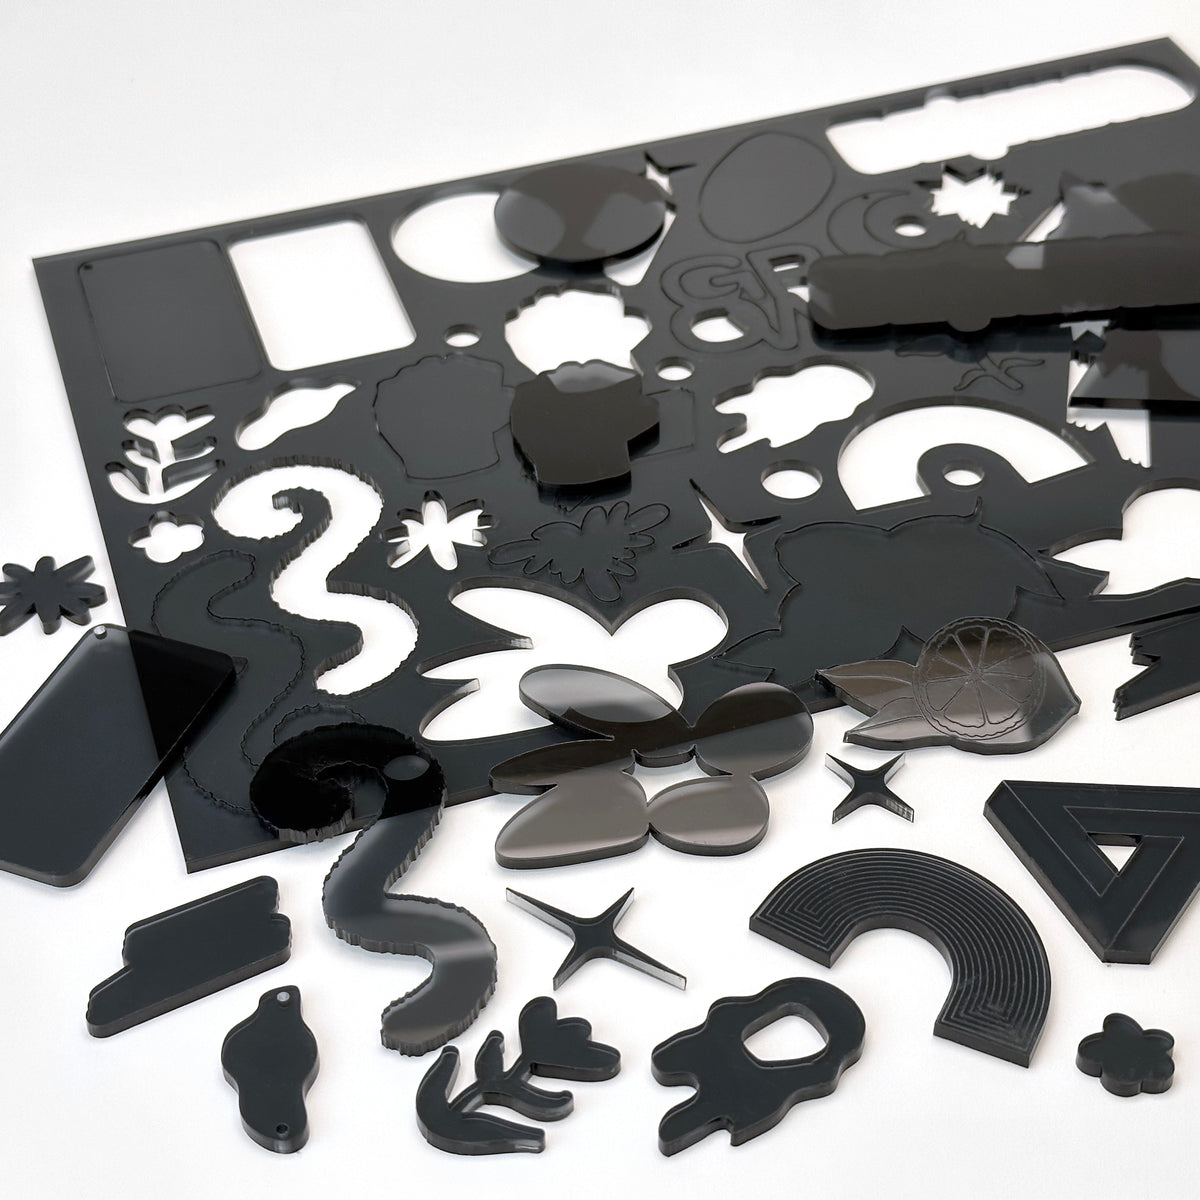 Transparent Black Acrylic with laser cutting only - 300x200mm